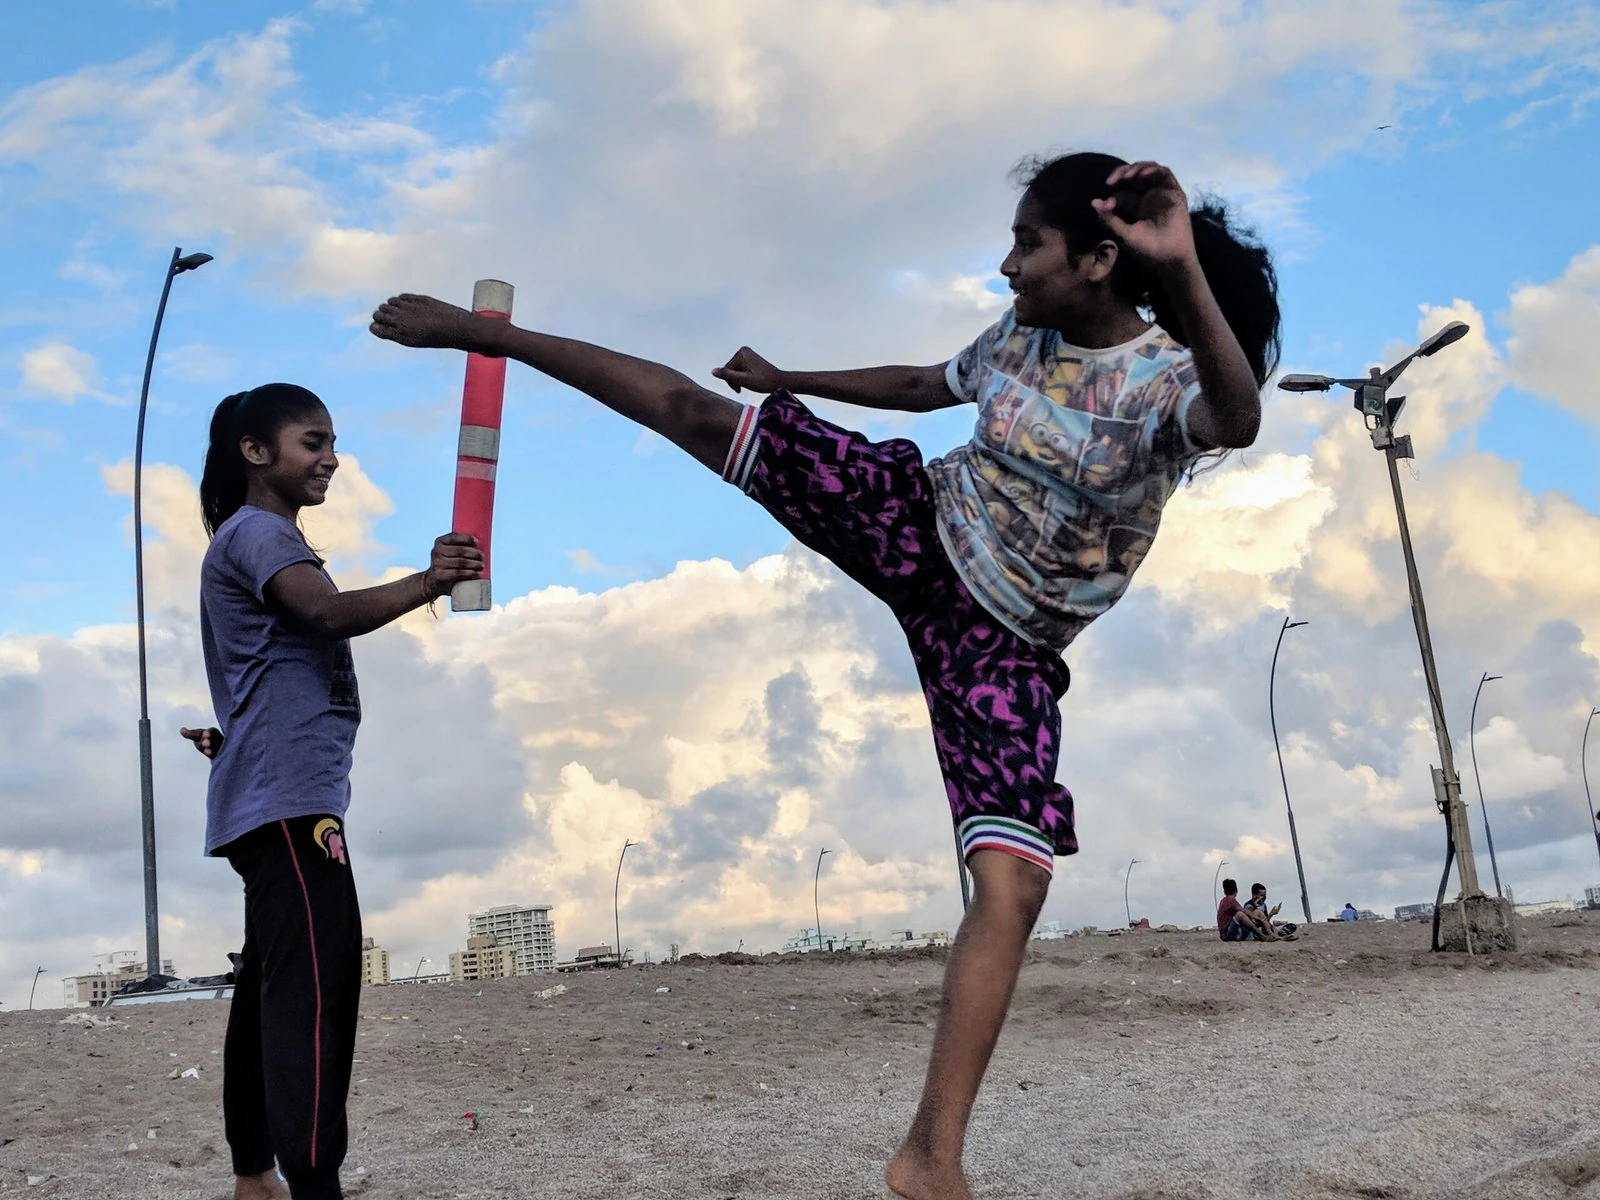 A girl kicks at an object held up by another girl on the beach.